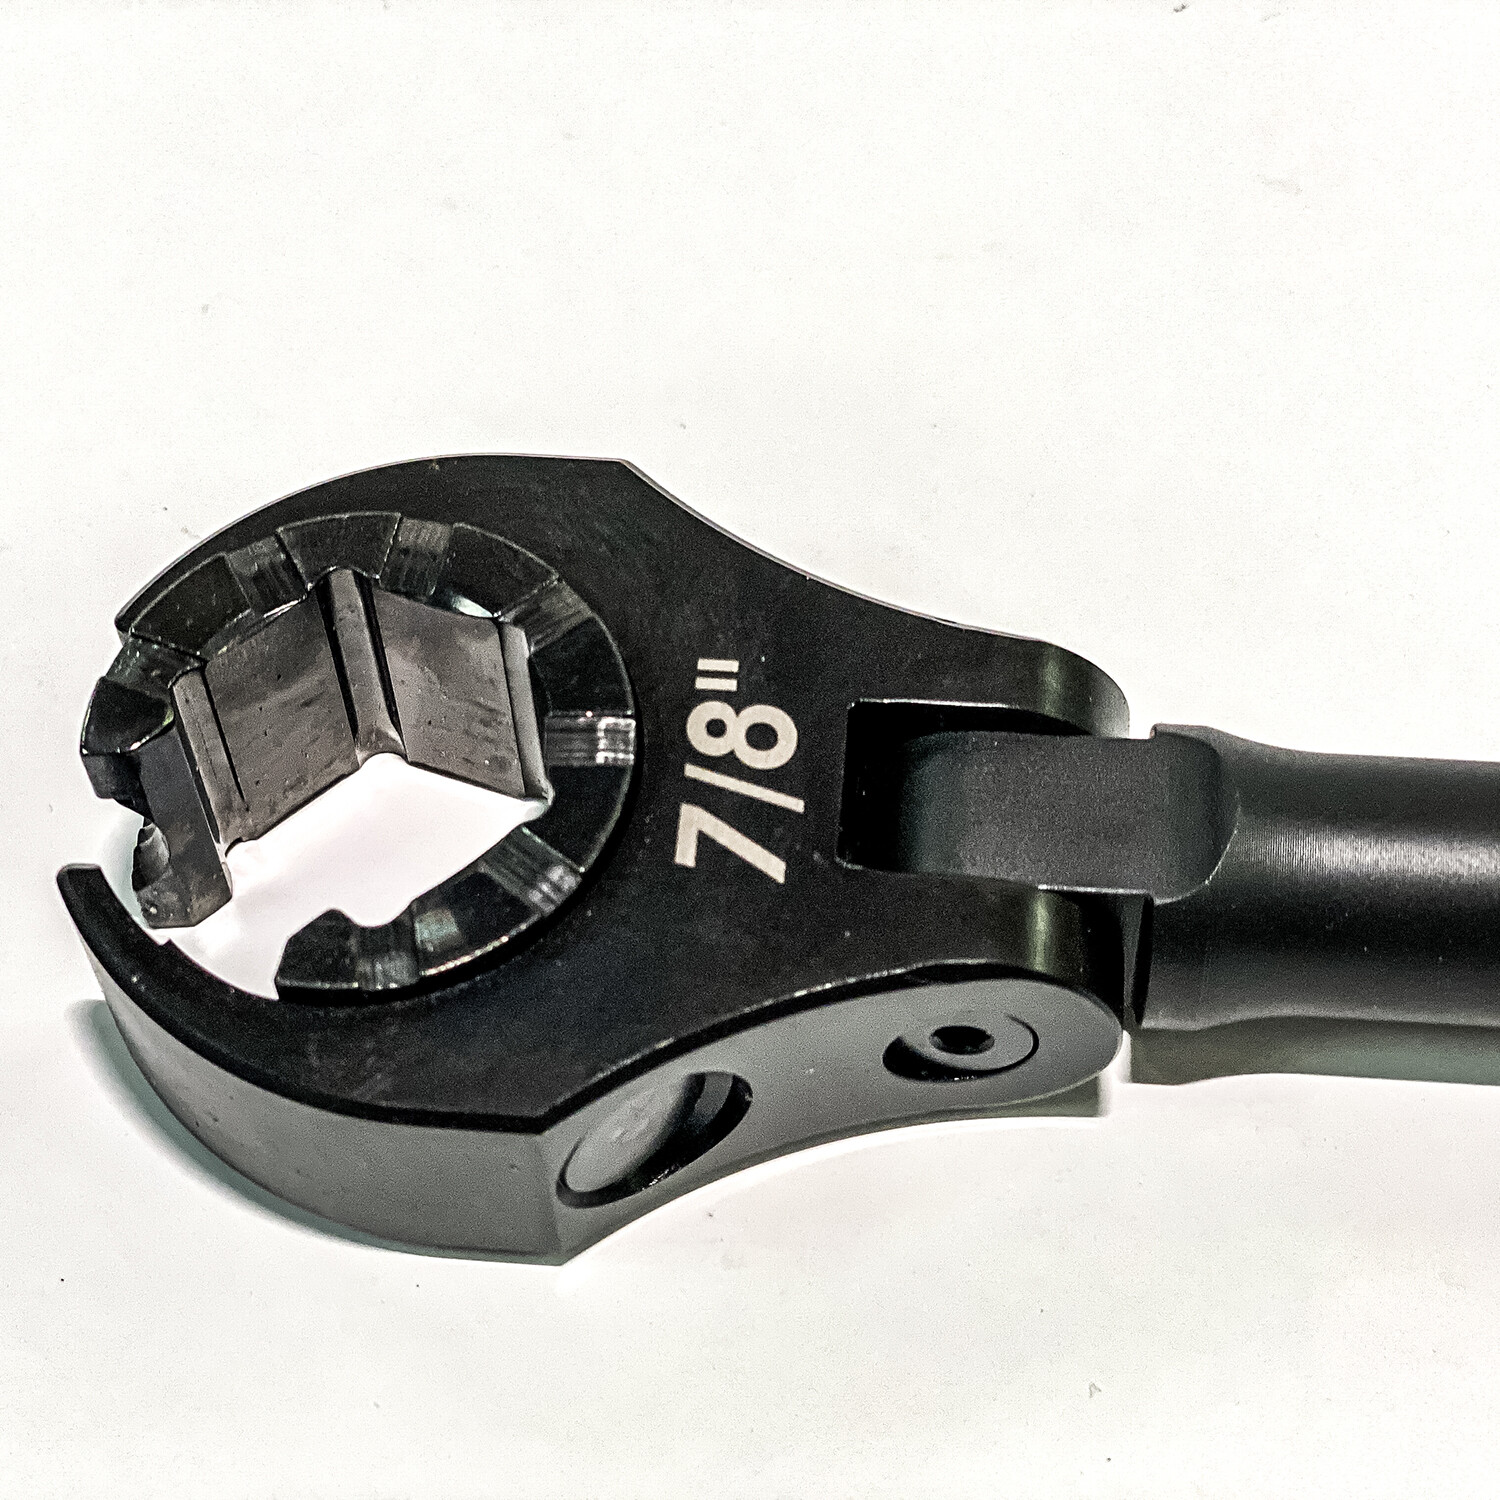 O2 Sensor Wrench (7/8) - Tribus Tools - Touch of Modern